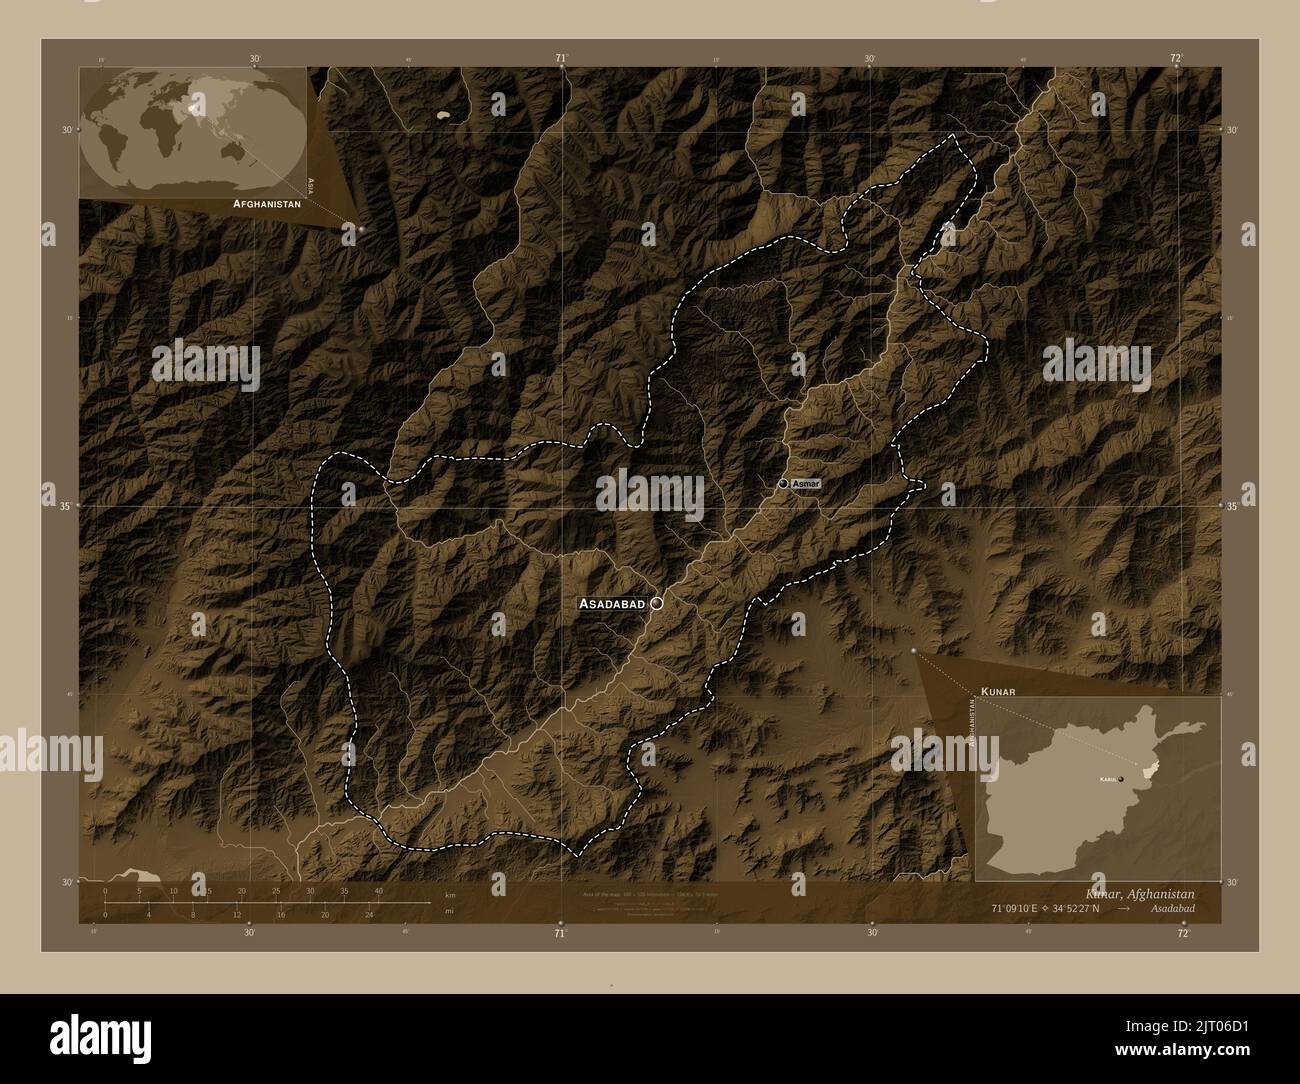 Kunar, province of Afghanistan. Elevation map colored in sepia tones with lakes and rivers. Locations and names of major cities of the region. Corner Stock Photo